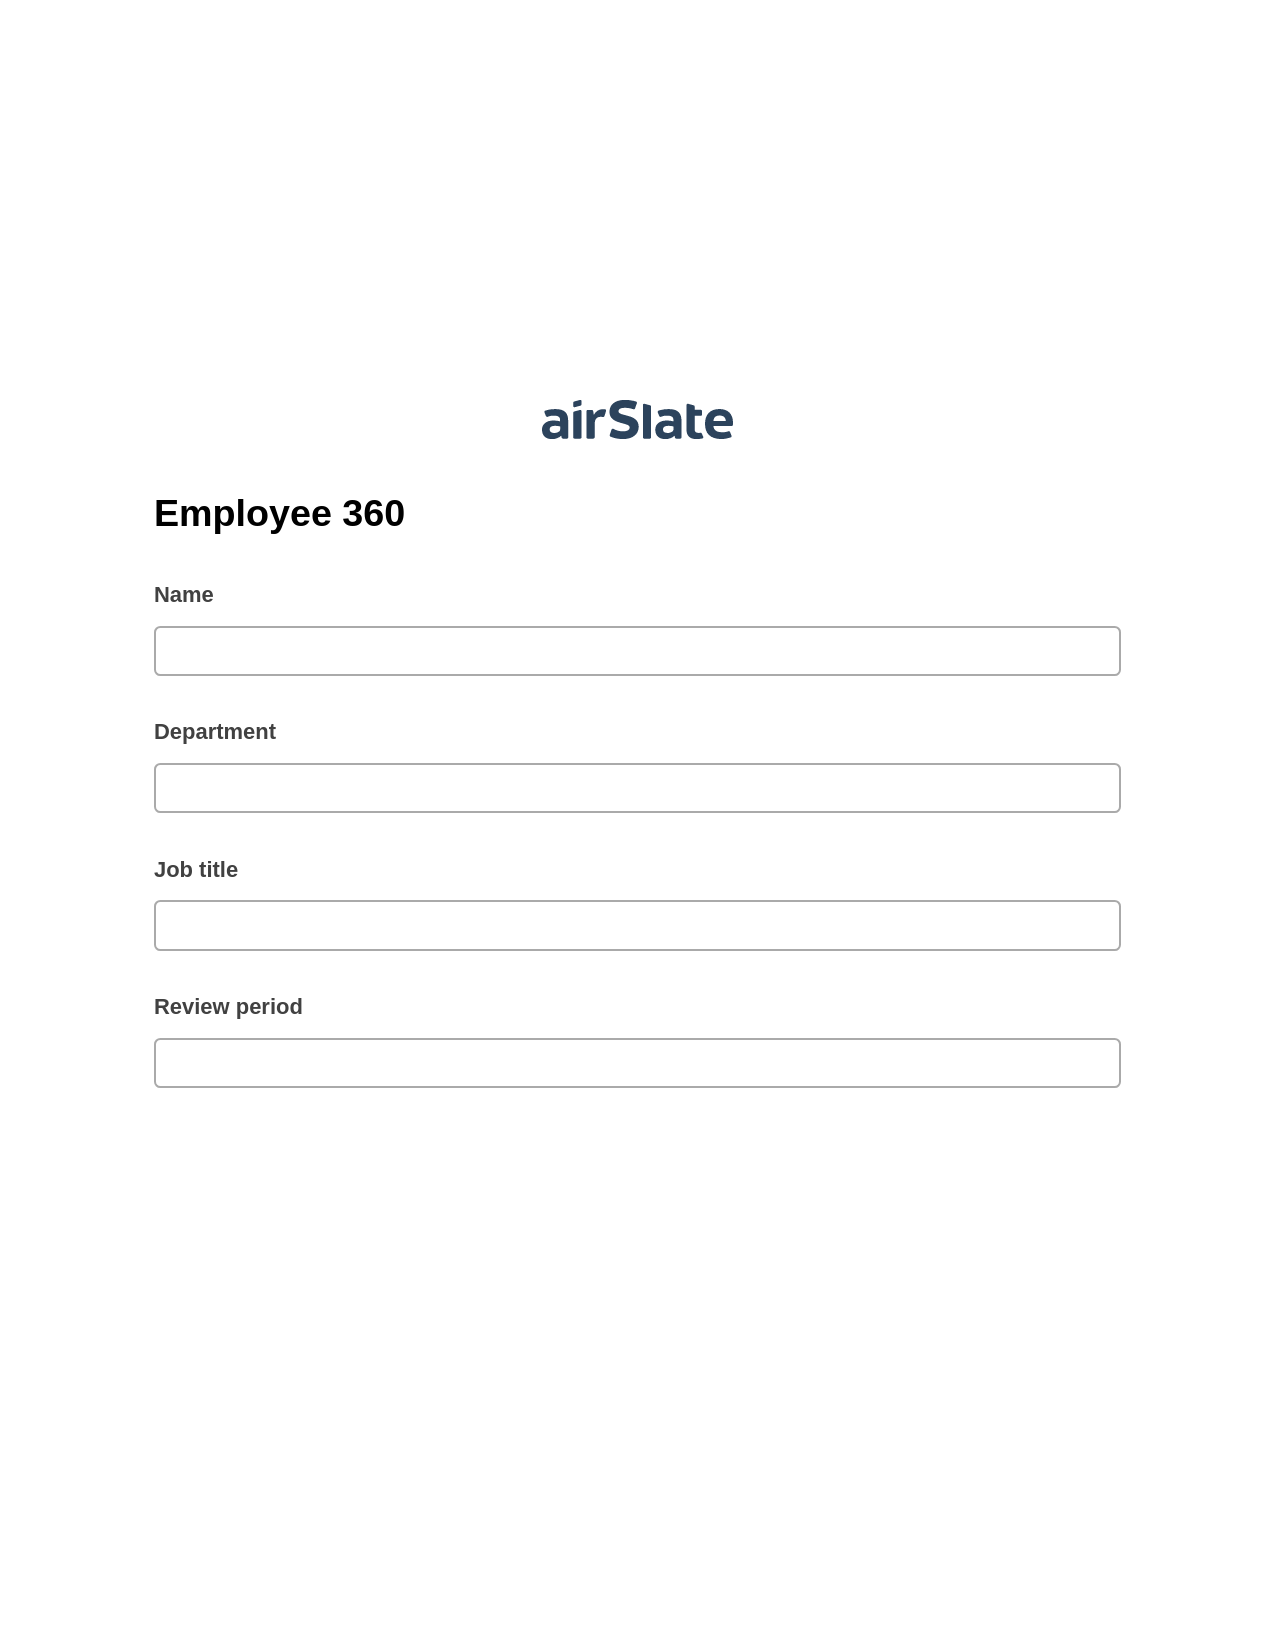 Employee 360 Pre-fill from CSV File Bot, Reminder Bot, Archive to SharePoint Folder Bot